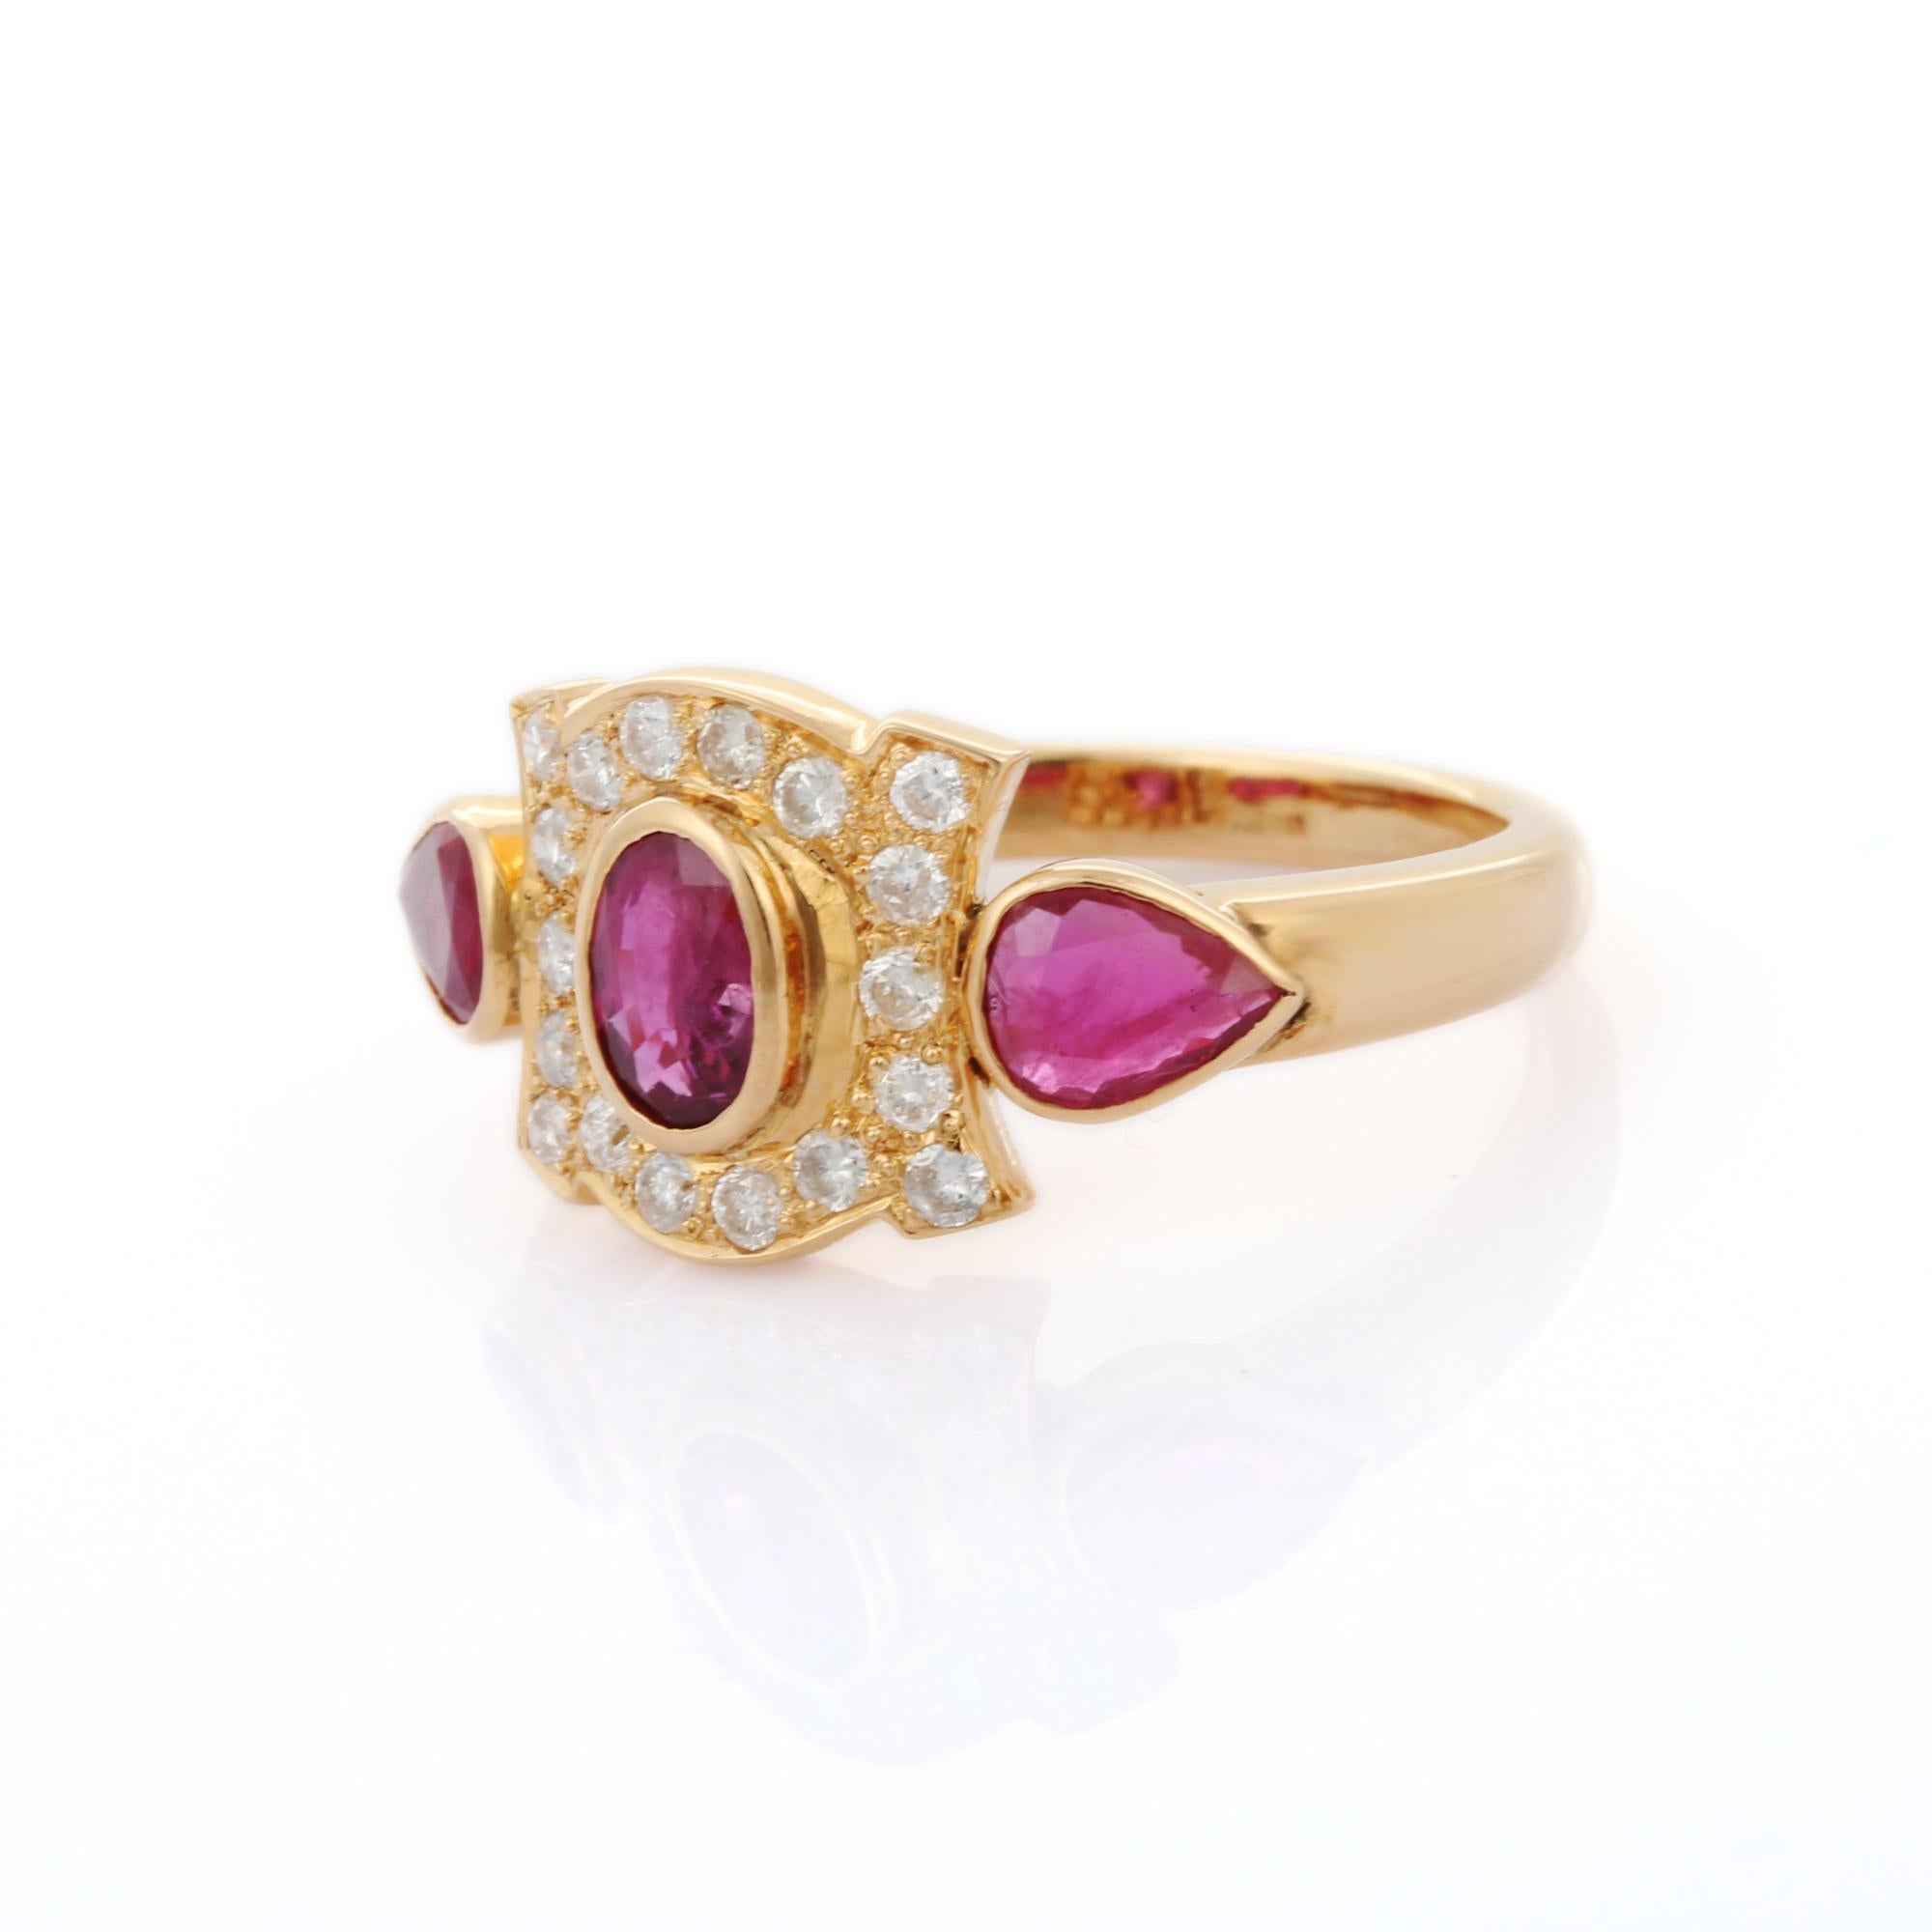 For Sale:  18K Yellow Gold Ruby Three Stone Ring with Diamonds Wedding Gemstone Ring 3